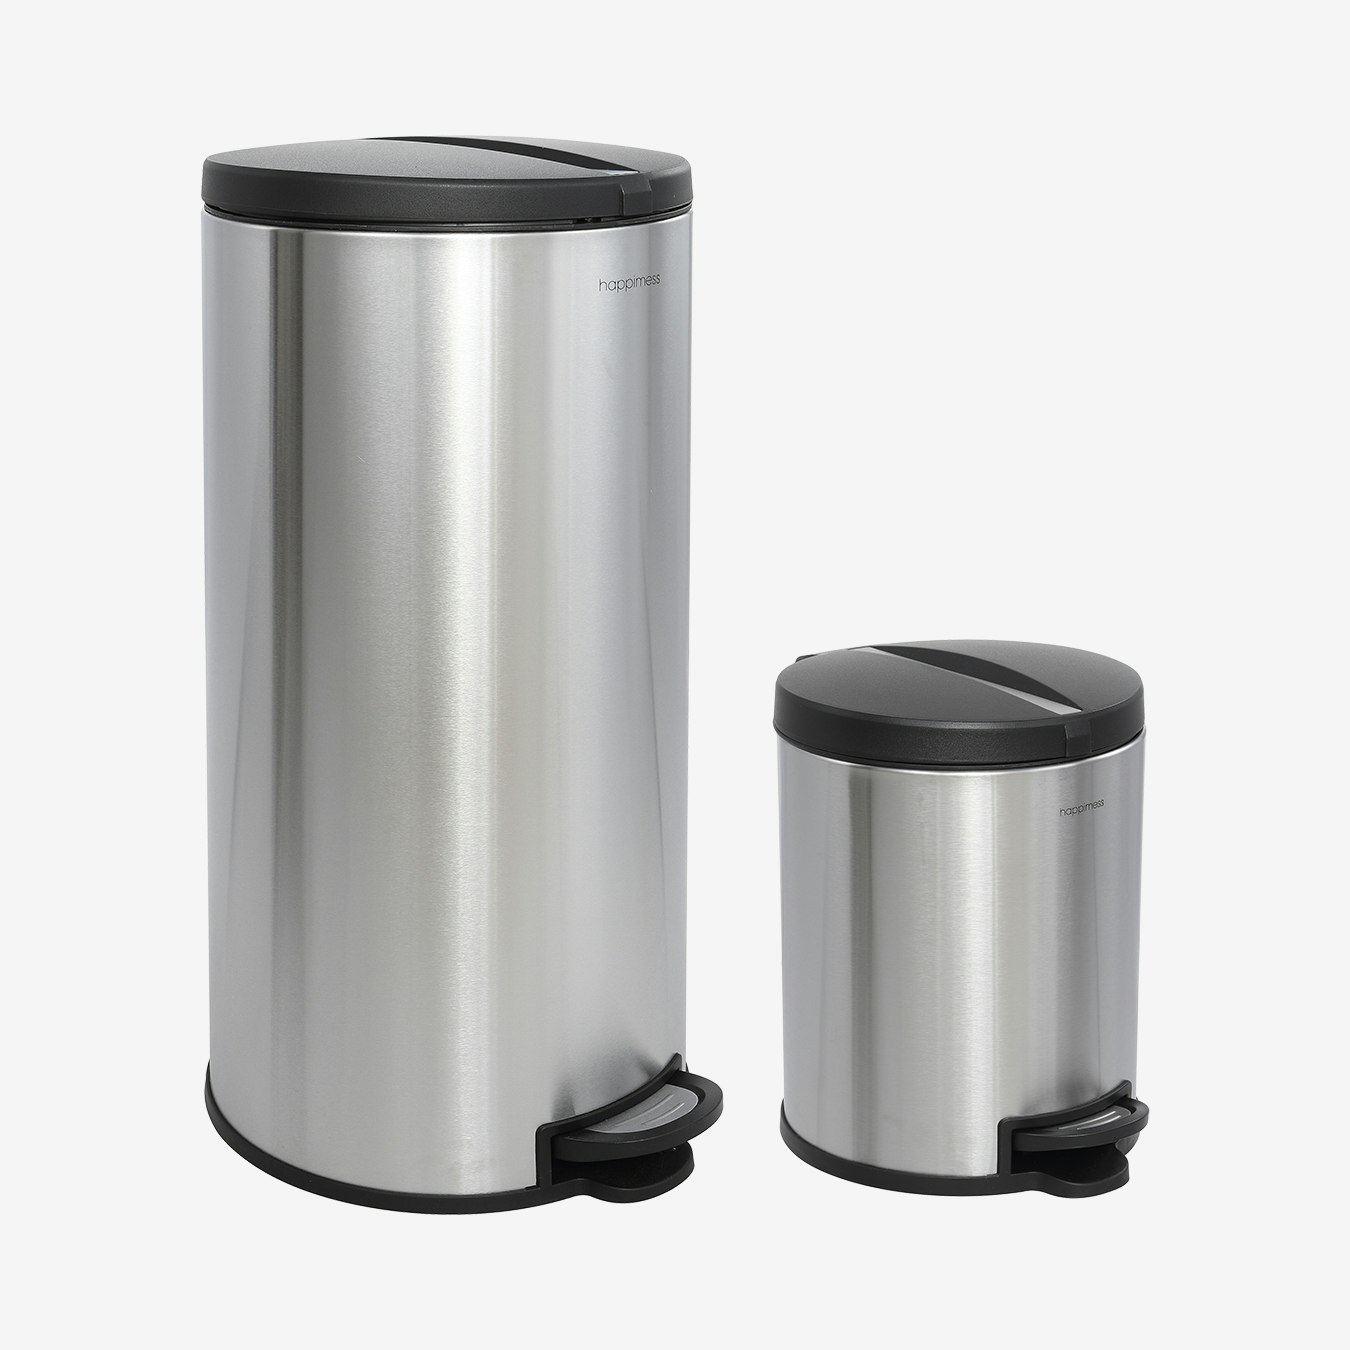 Oscar Round Step-Open Trash Cans - Black / Silver - Iron - Set of 2 by  JONATHAN Y - Fy